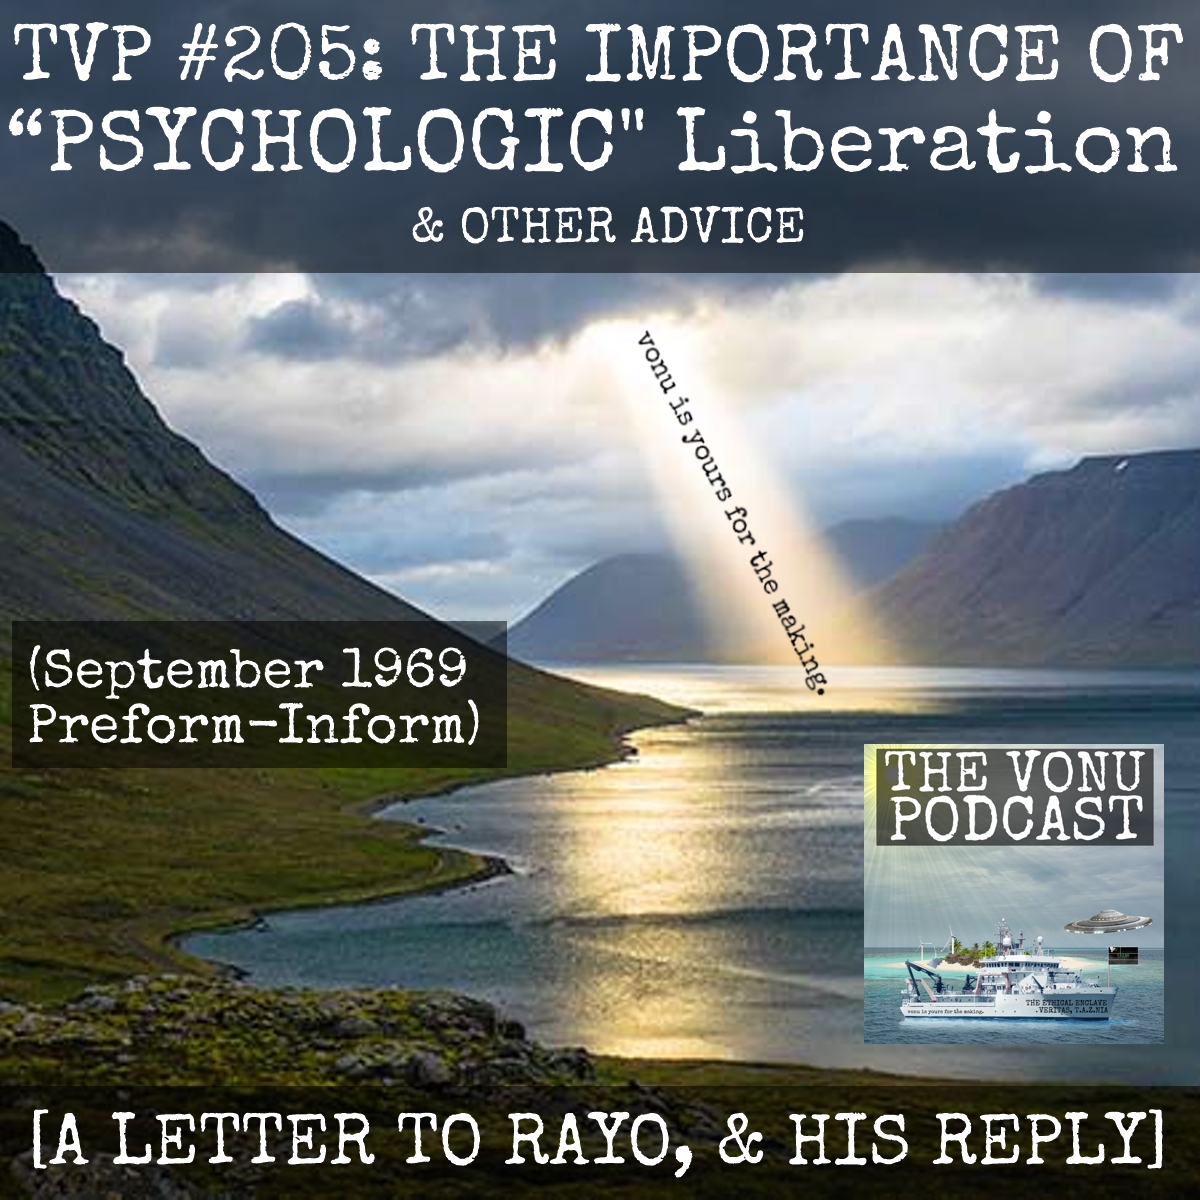 TVP #205: THE IMPORTANCE OF “PSYCHOLOGIC” LIBERATION, & OTHER ADVICE [A Letter To Rayo & His Reply] (September 1969 Preform-Inform)